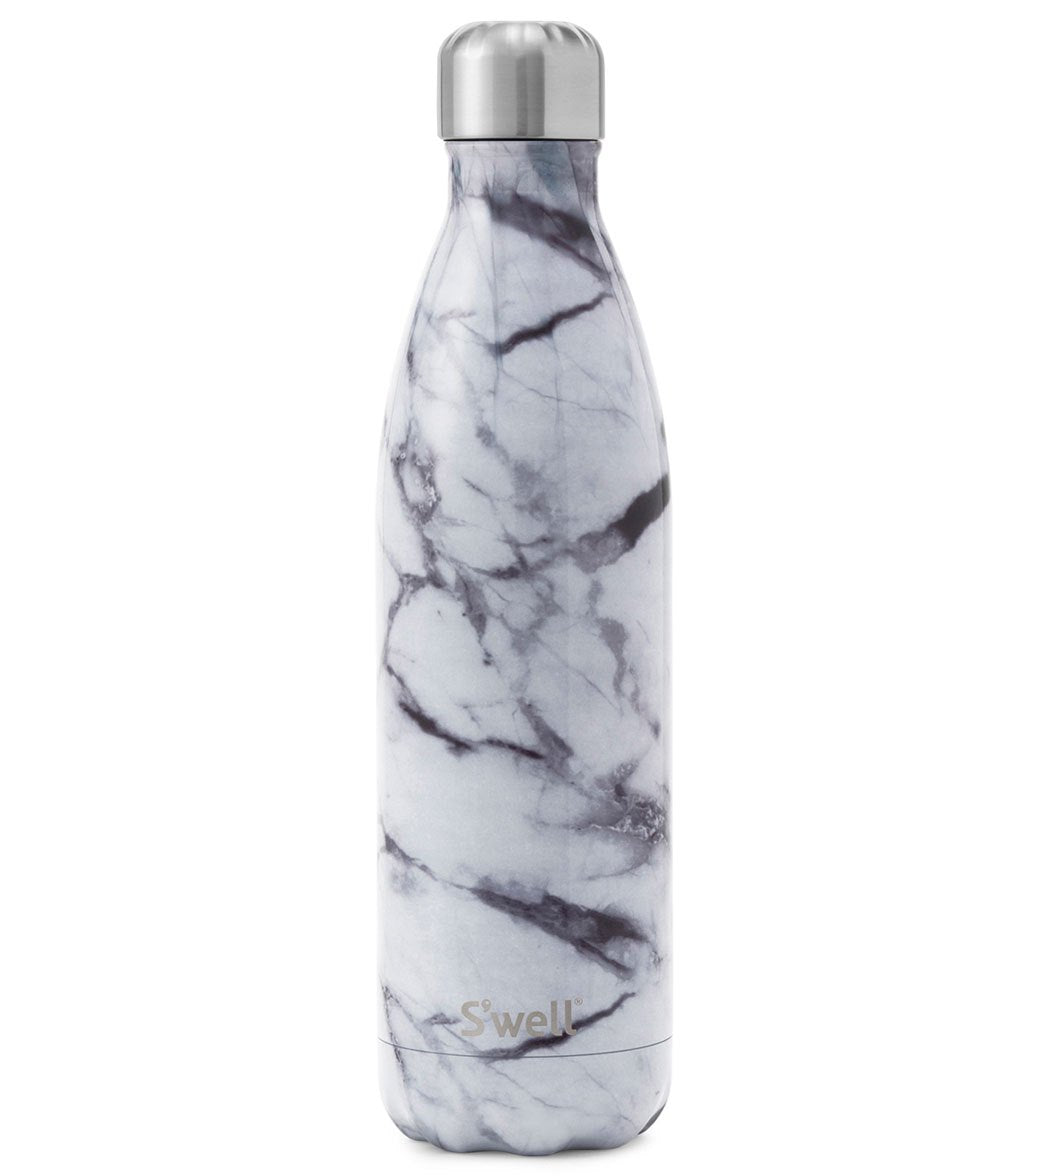 S'well 25oz Stainless Steel Water Bottle White Marble